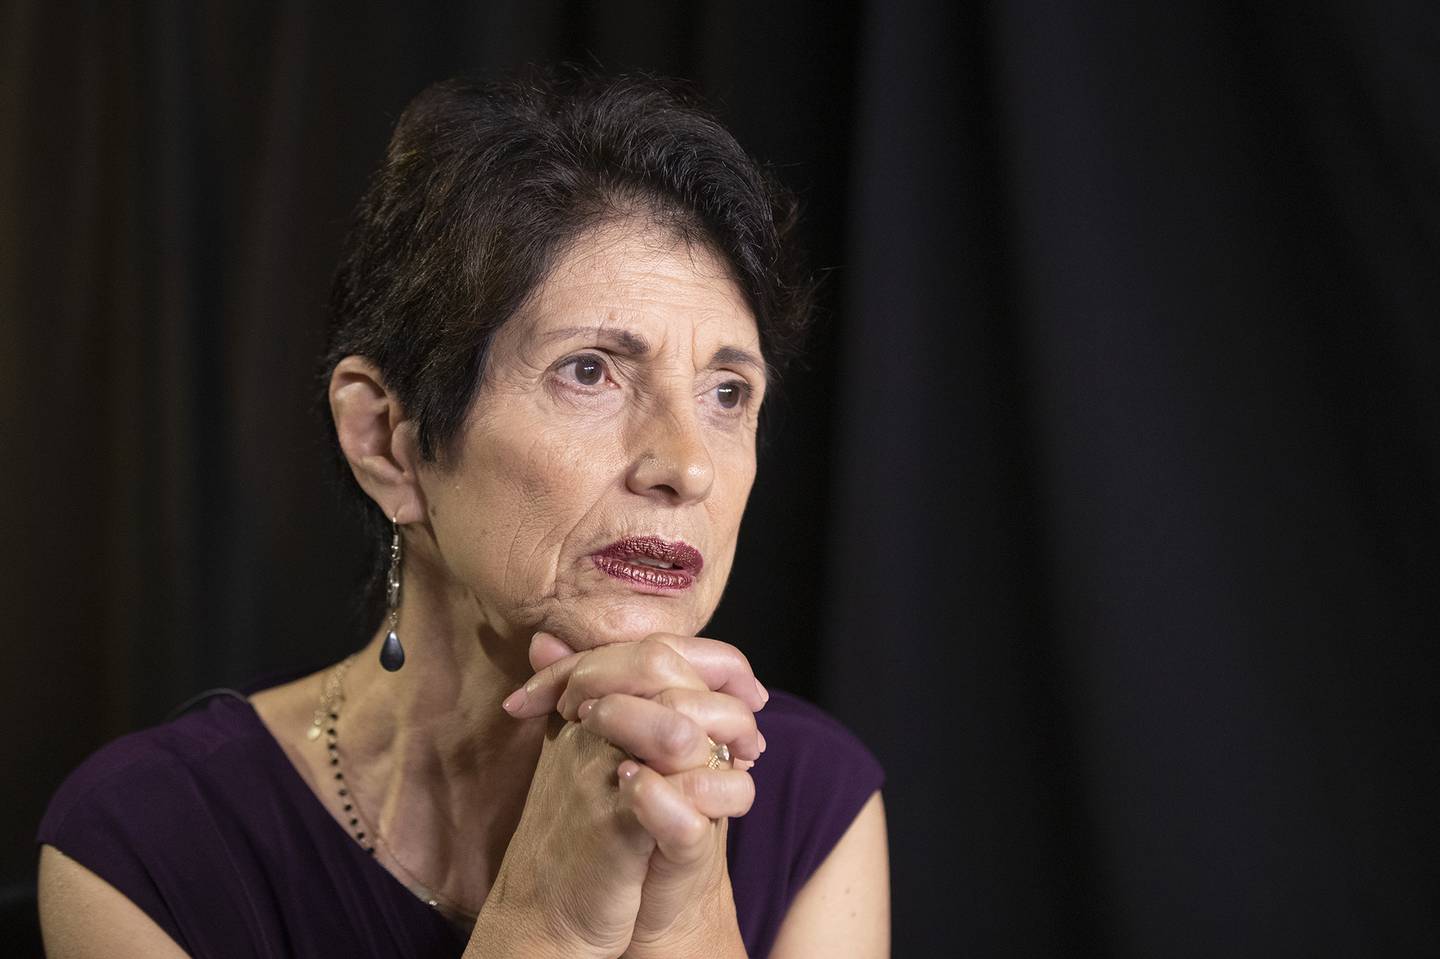 In this June 19, 2019, file photo, Diane Foley, mother of journalist James Foley, who was killed by the Islamic State terrorist group in a graphic video released online, speaks to the Associated Press during an interview in Washington.